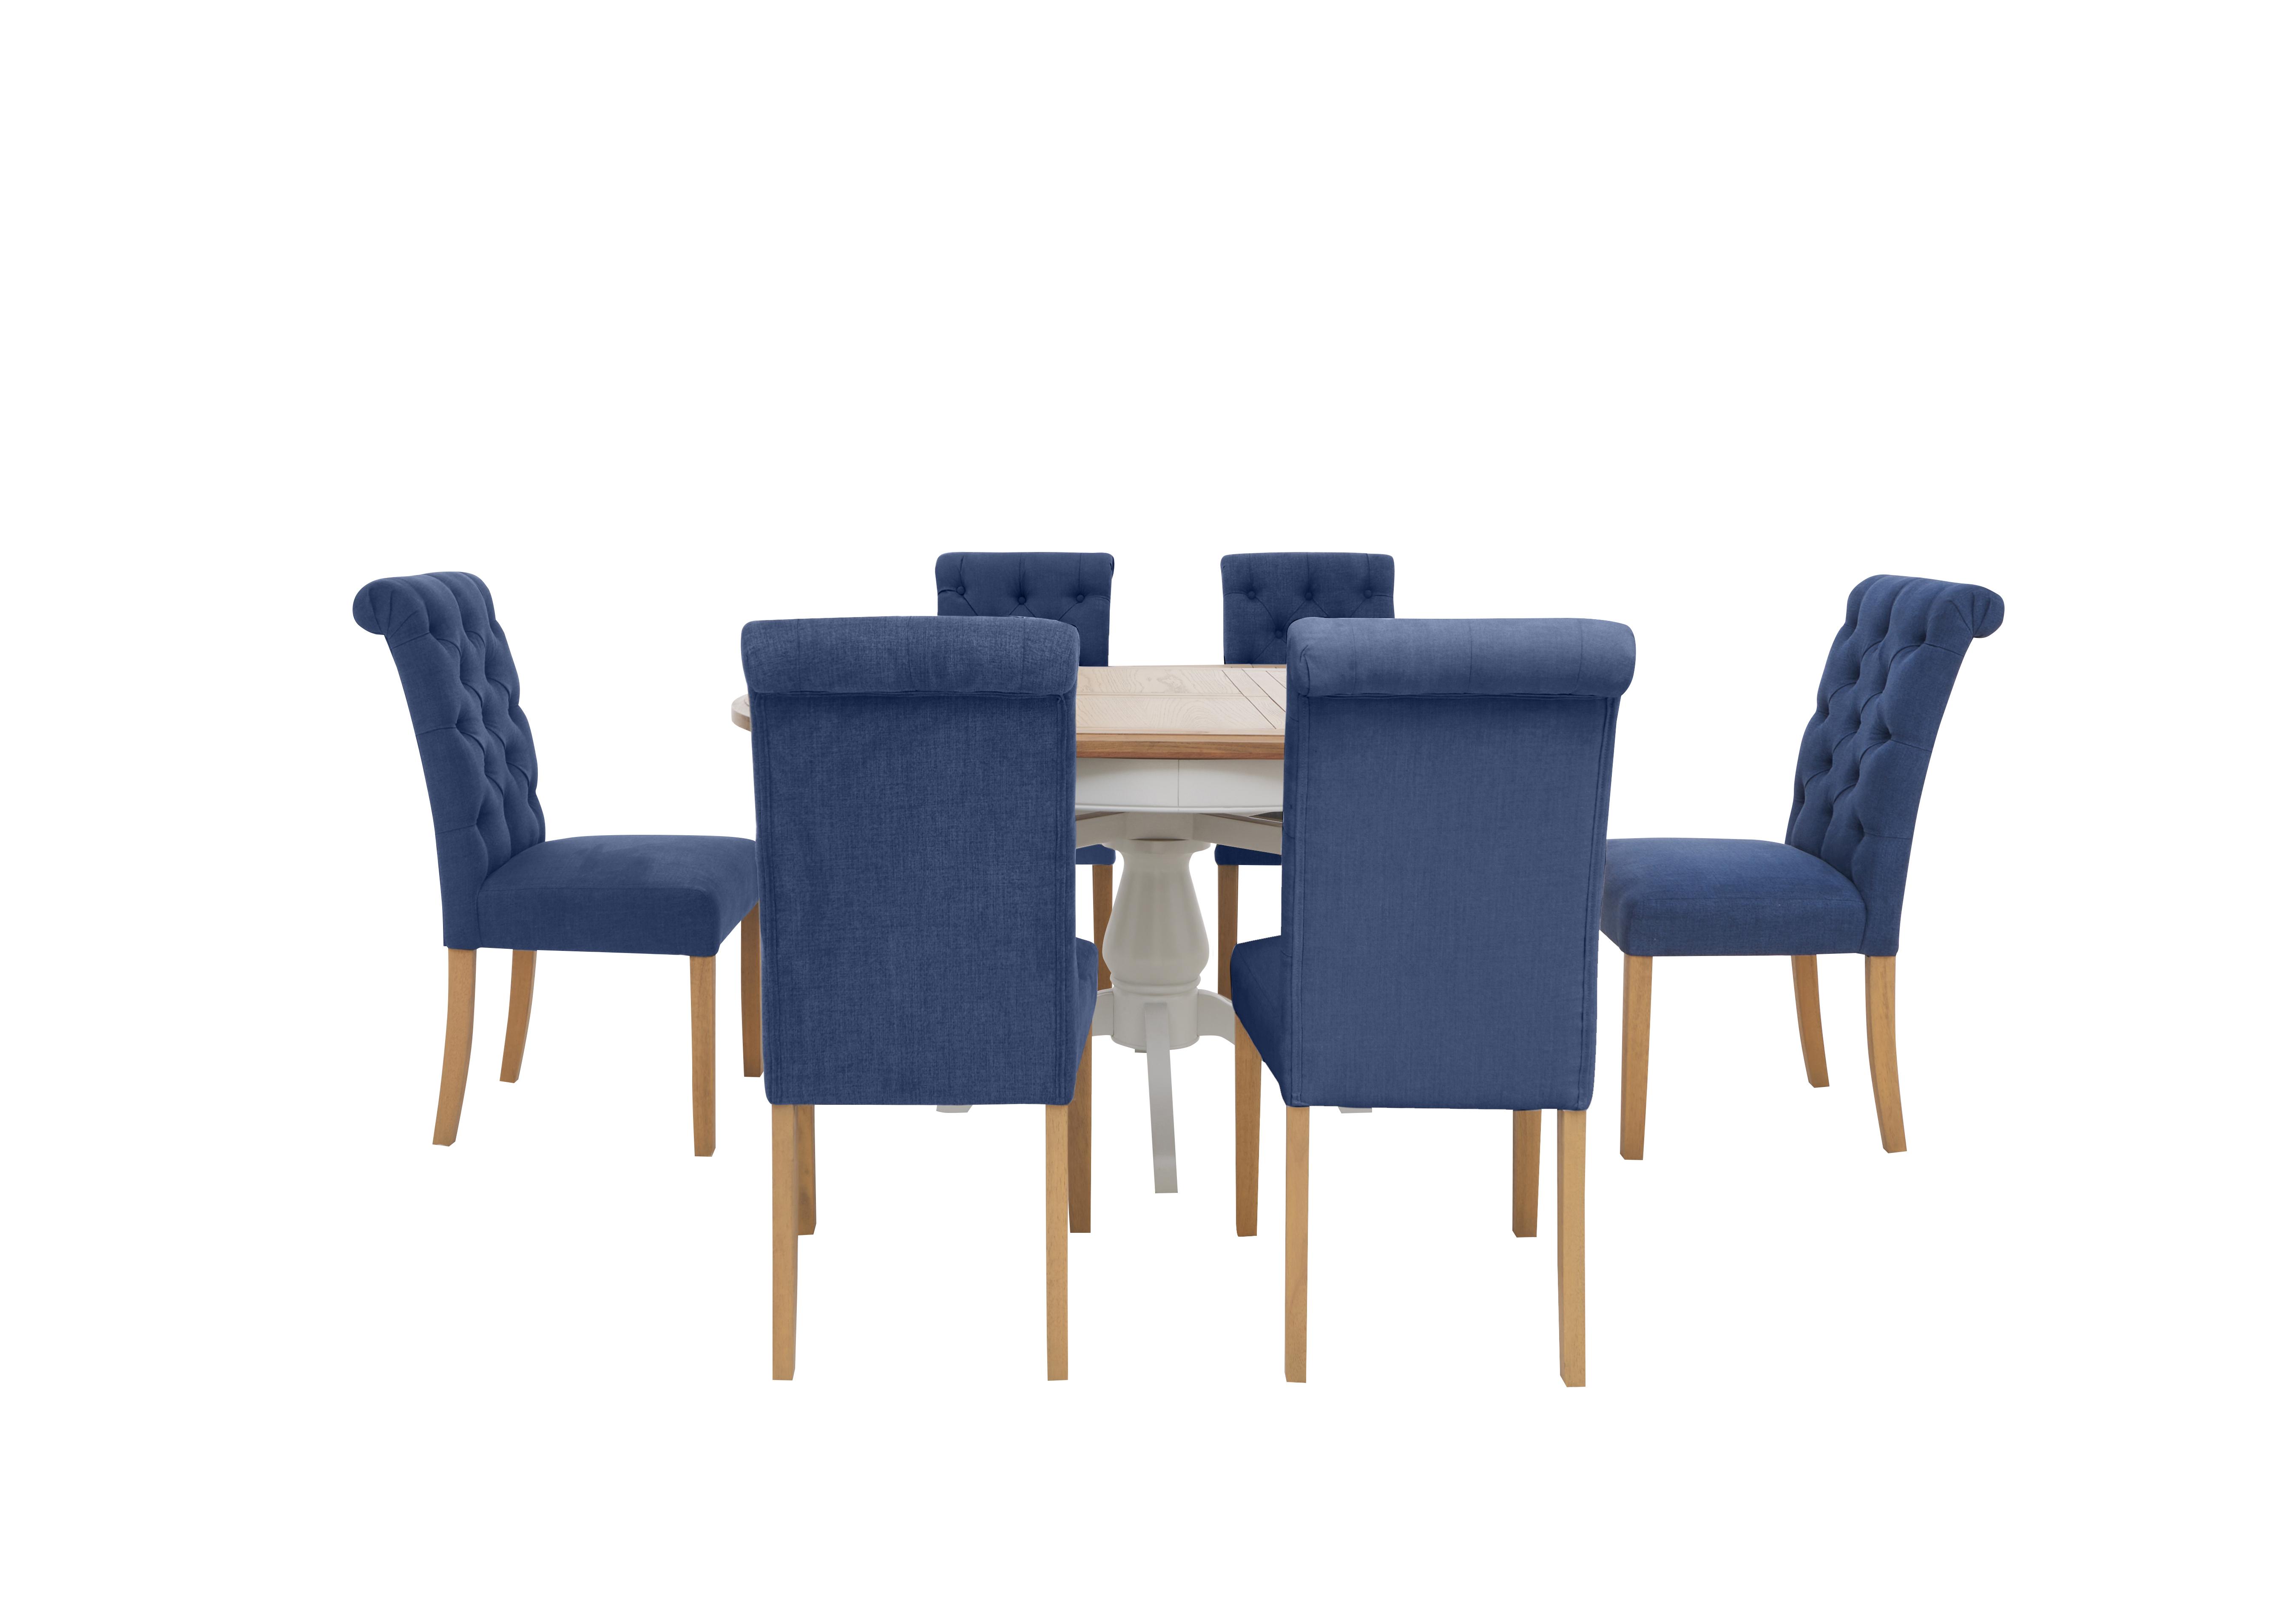 Hamilton Round Extending Dining Table and 6 Button Back Dining Chairs in Denim on Furniture Village